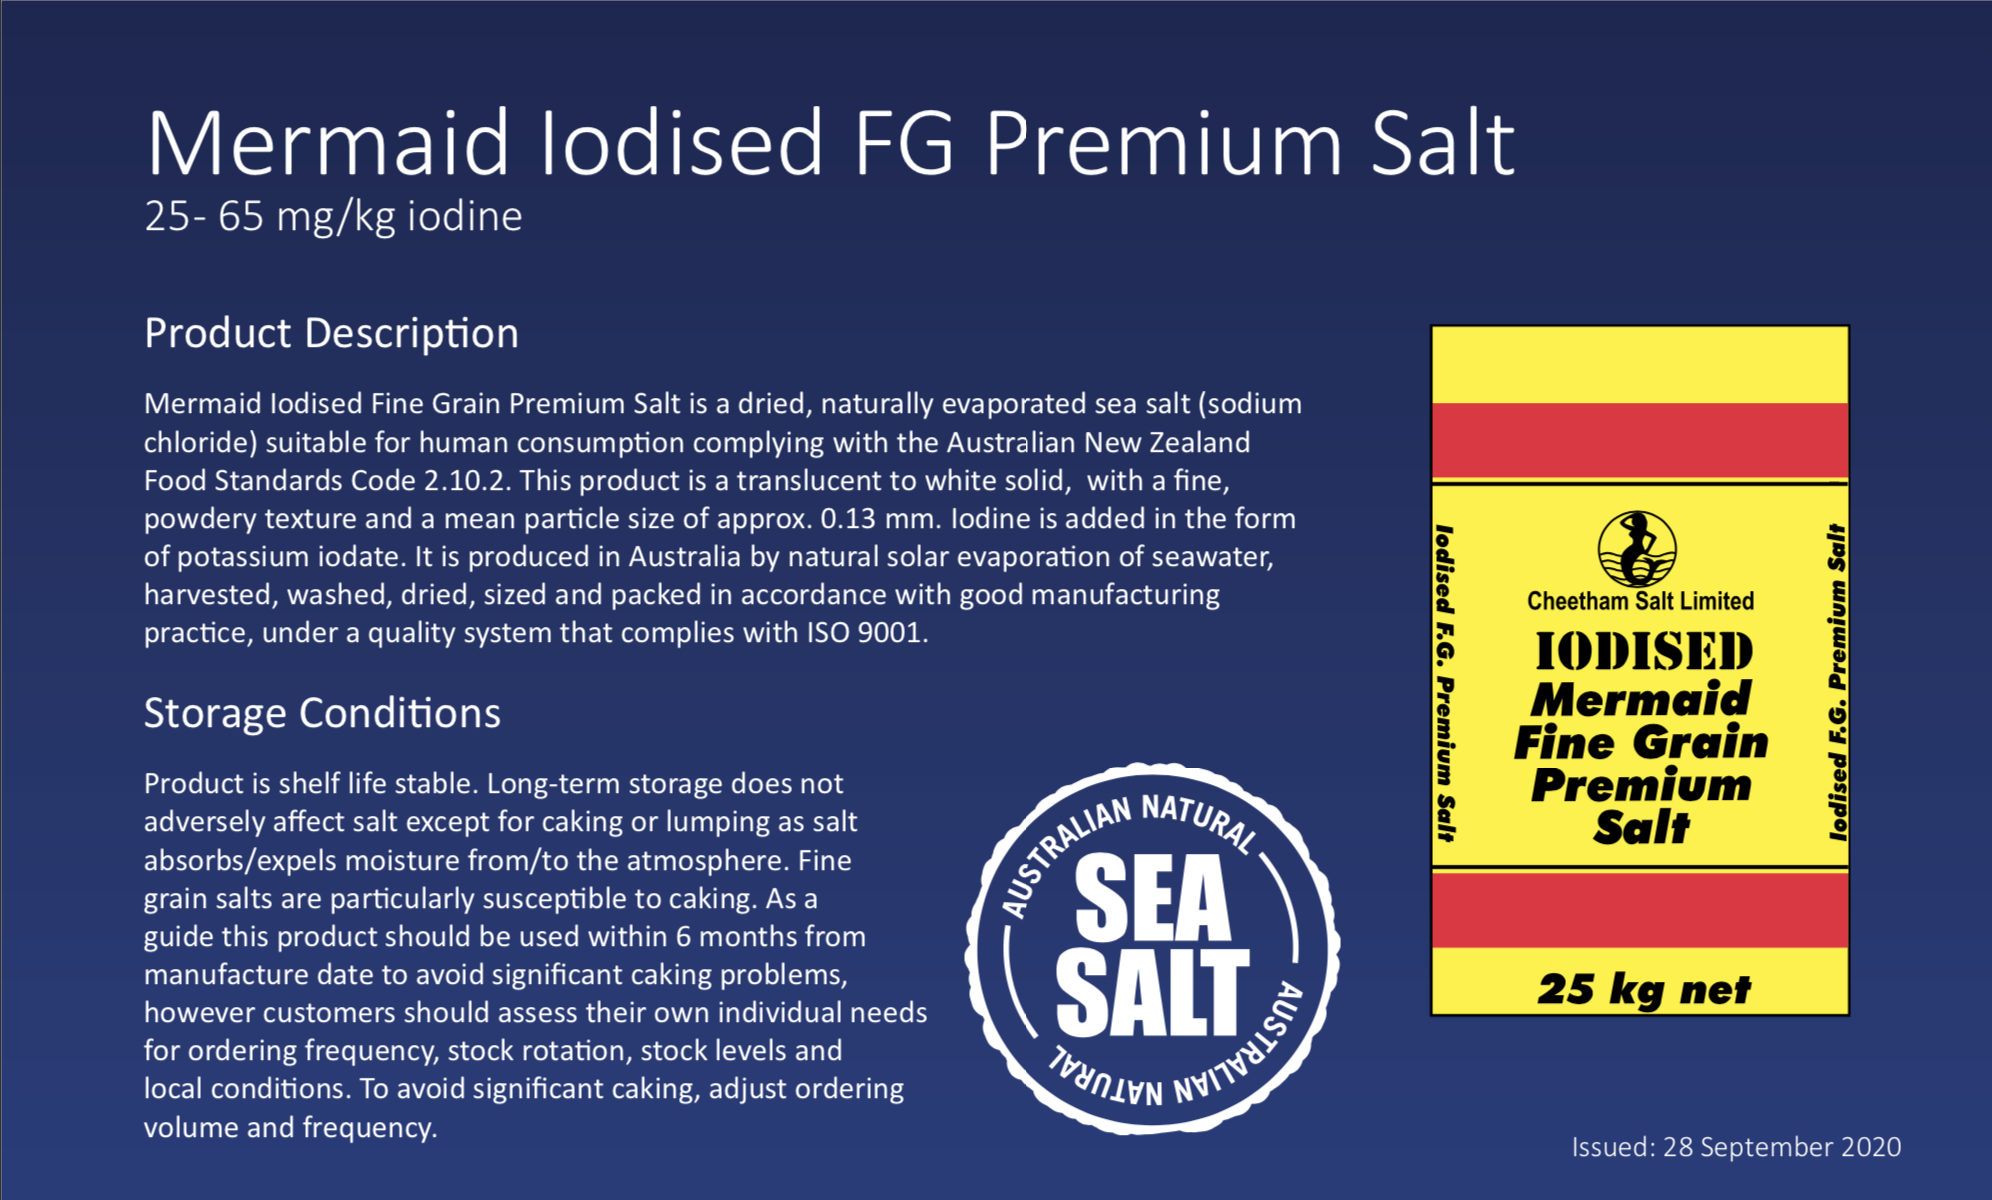 An image of Mermaid Iodised FG premium salt product description and storage conditions